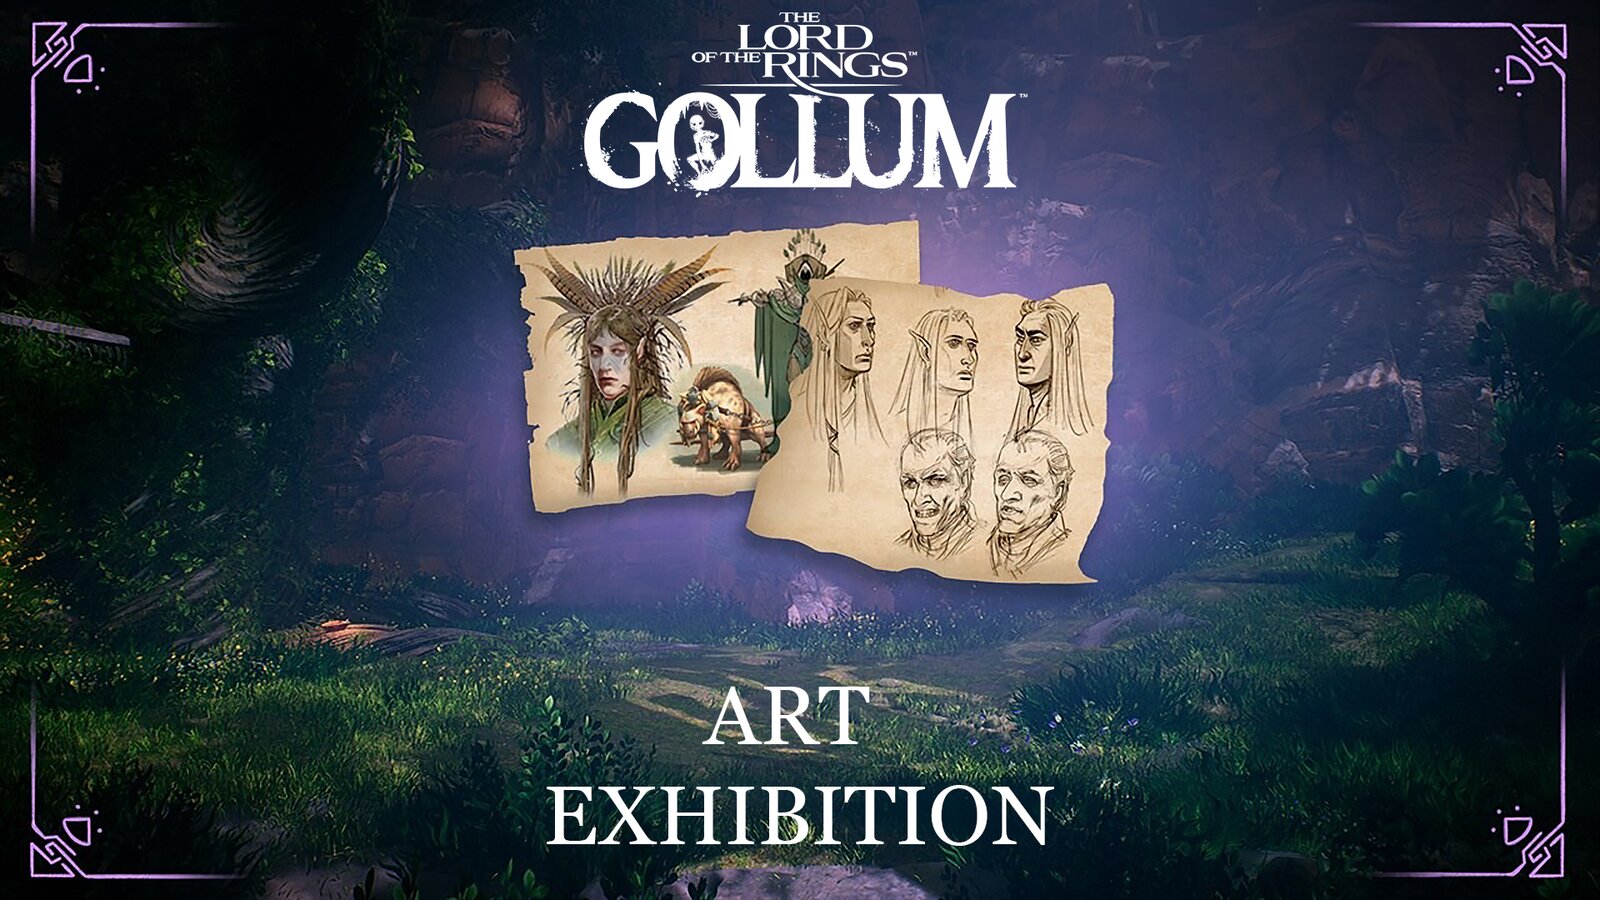 The Lord of the Rings: Gollum - Art Exhibition